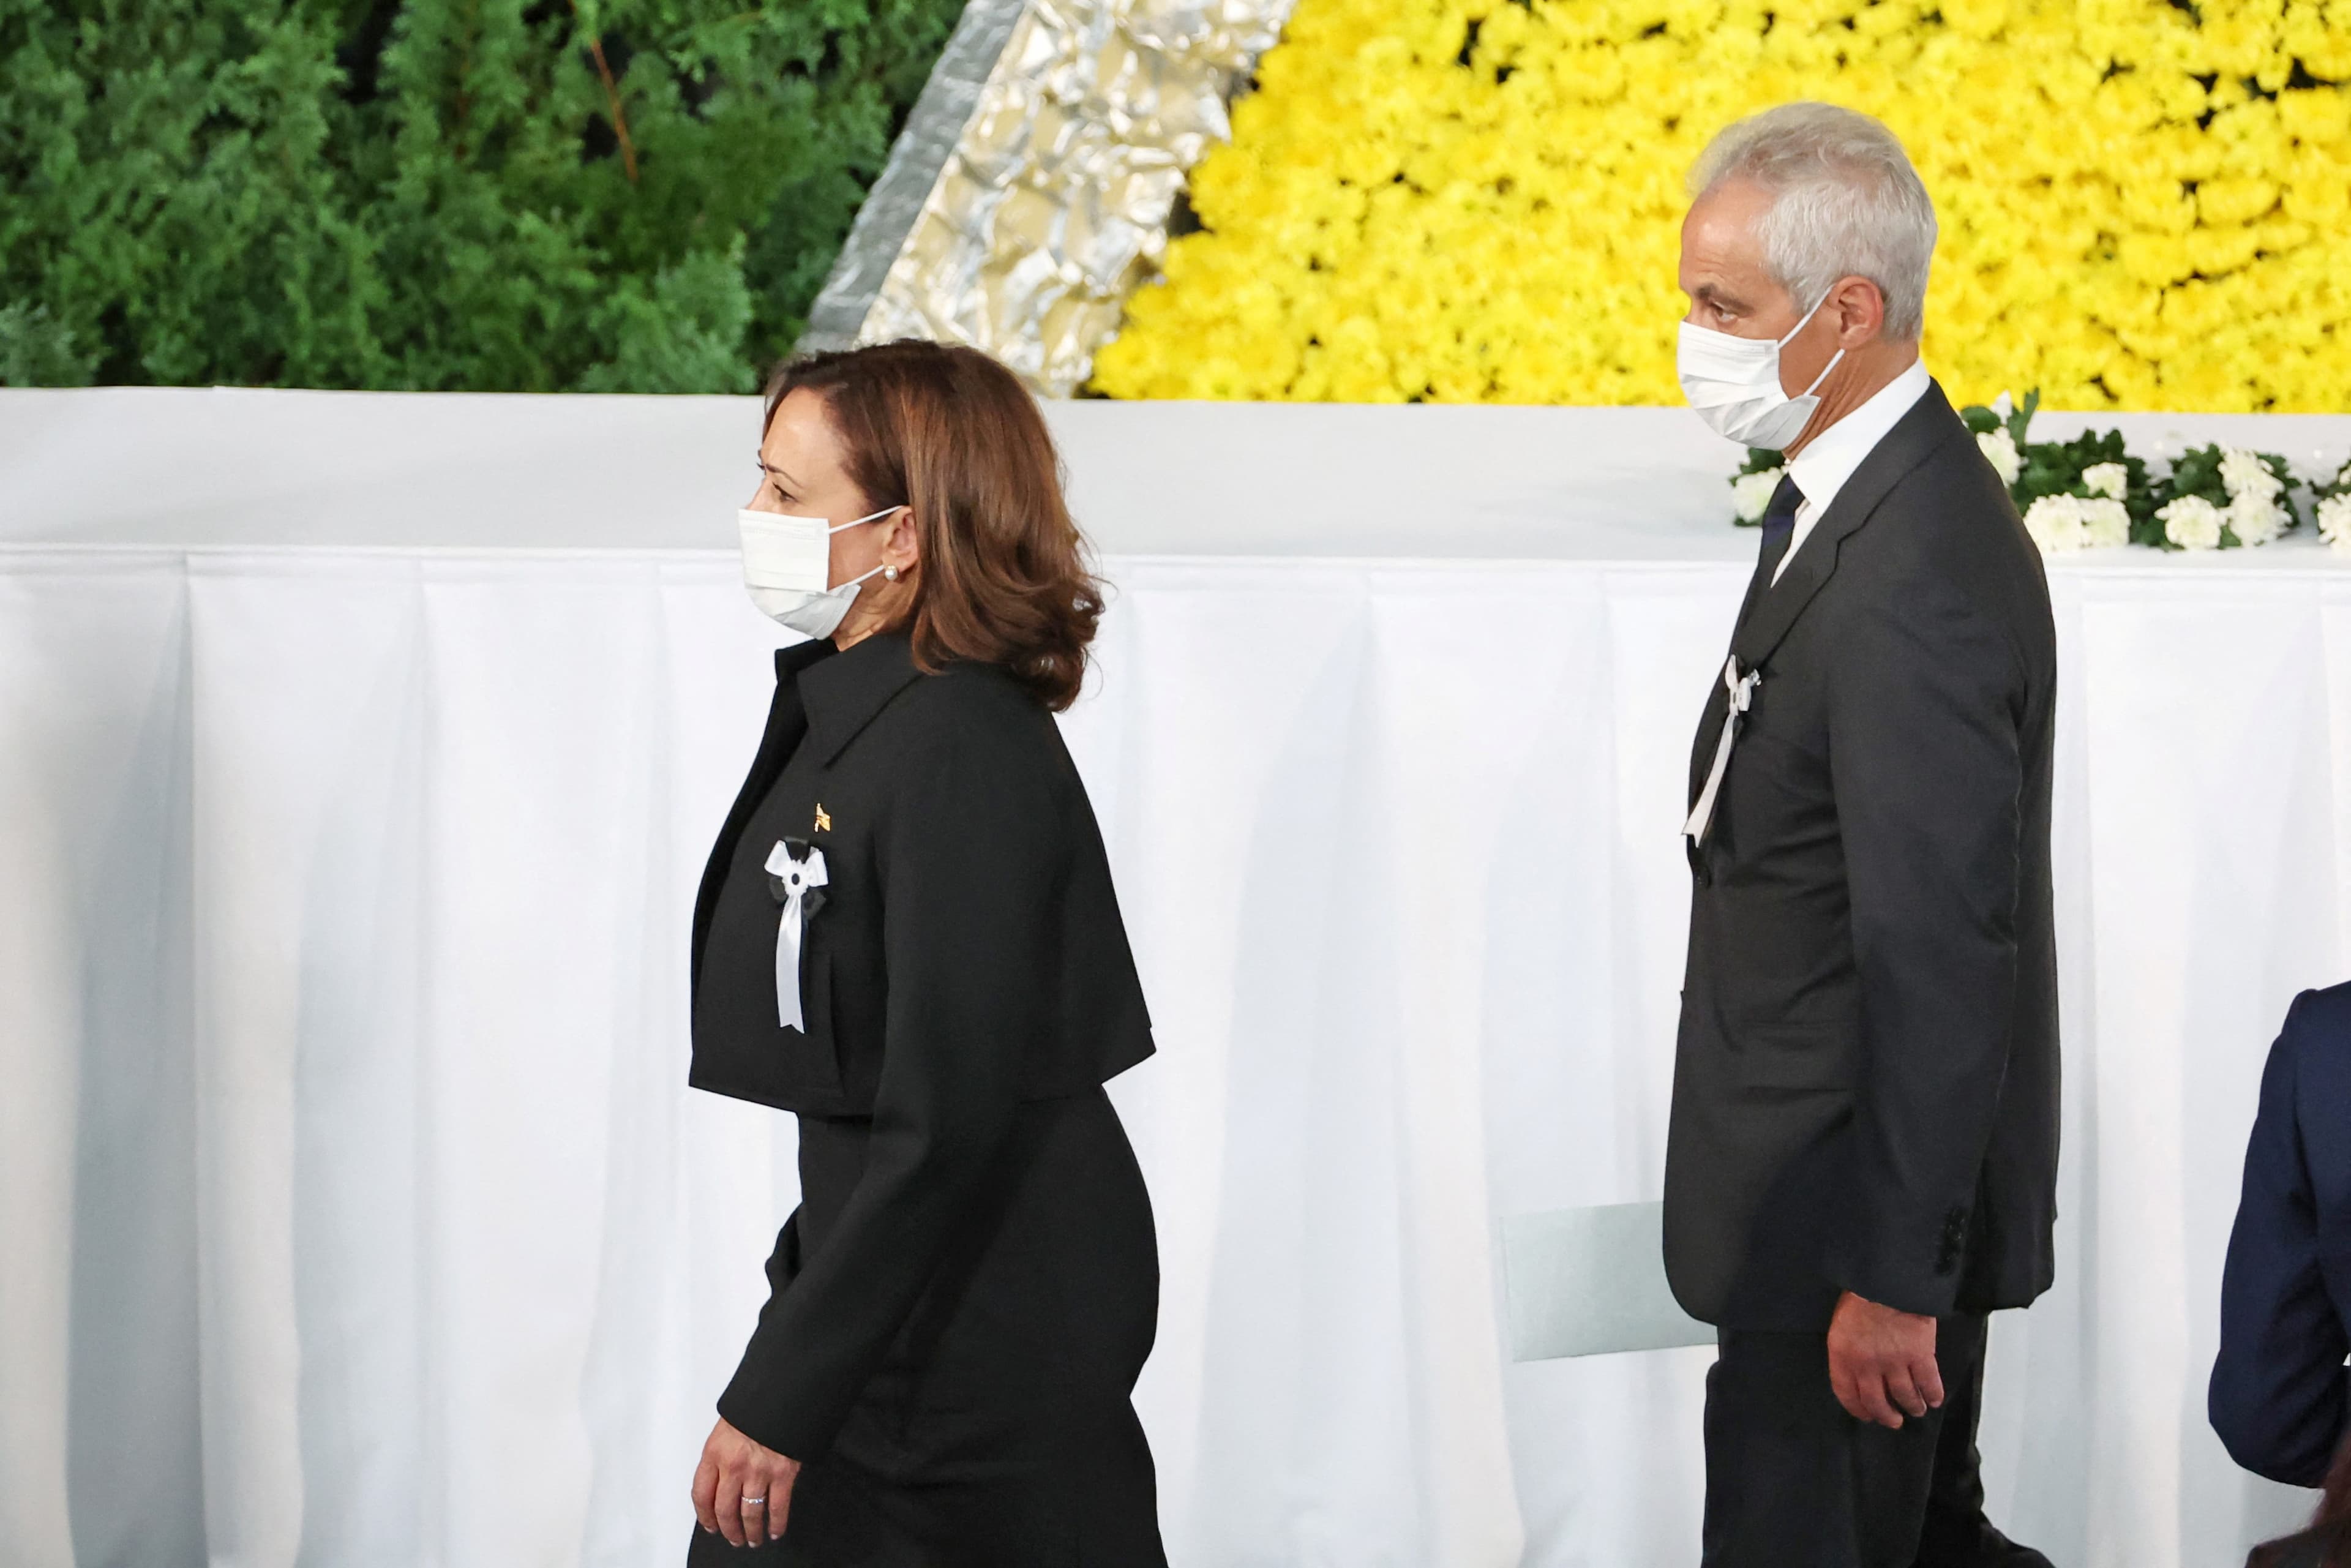 Shinzo Abe State Funeral: US Vice President, Kamala Harris, and U.S. Ambassador to Japan, Rahm Emanuel, pay their respects during the state funeral for Japan's former prime minister Shinzo Abe. (Reuters)